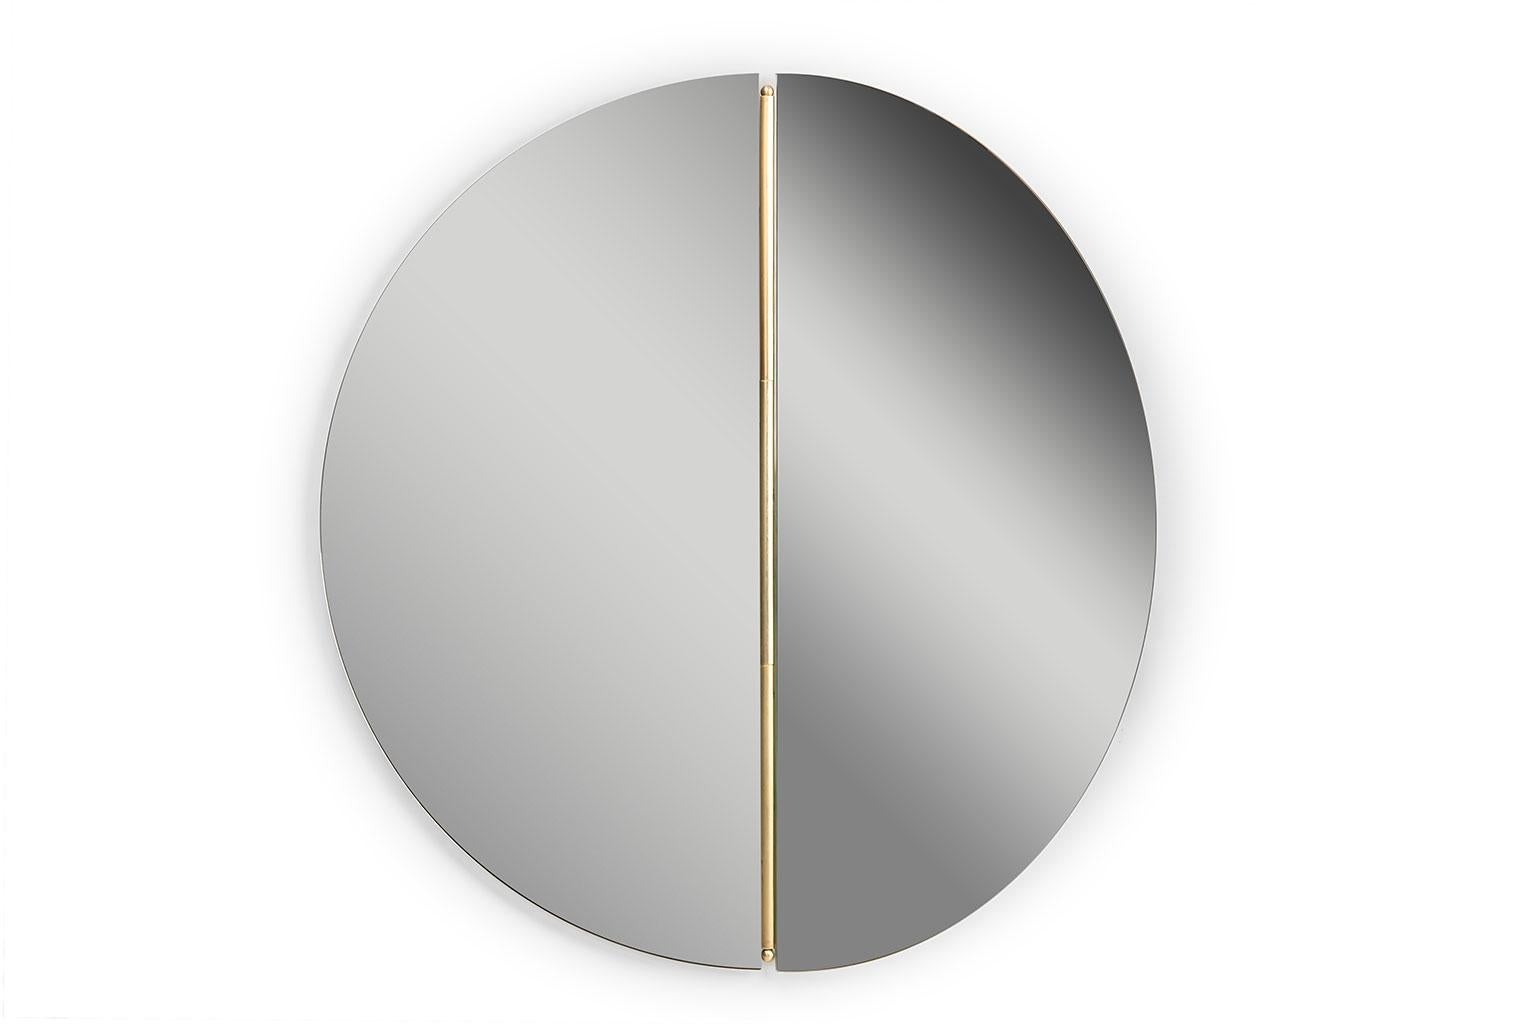 Rondo mirror designed by Bernhardt-Vella for Mingardo. Rondò reinterprets the Classic round mirror to accommodate it to any domestic environment, whether it is a living area, bedroom or bathroom. The half portion of the mirror can be adjusted so